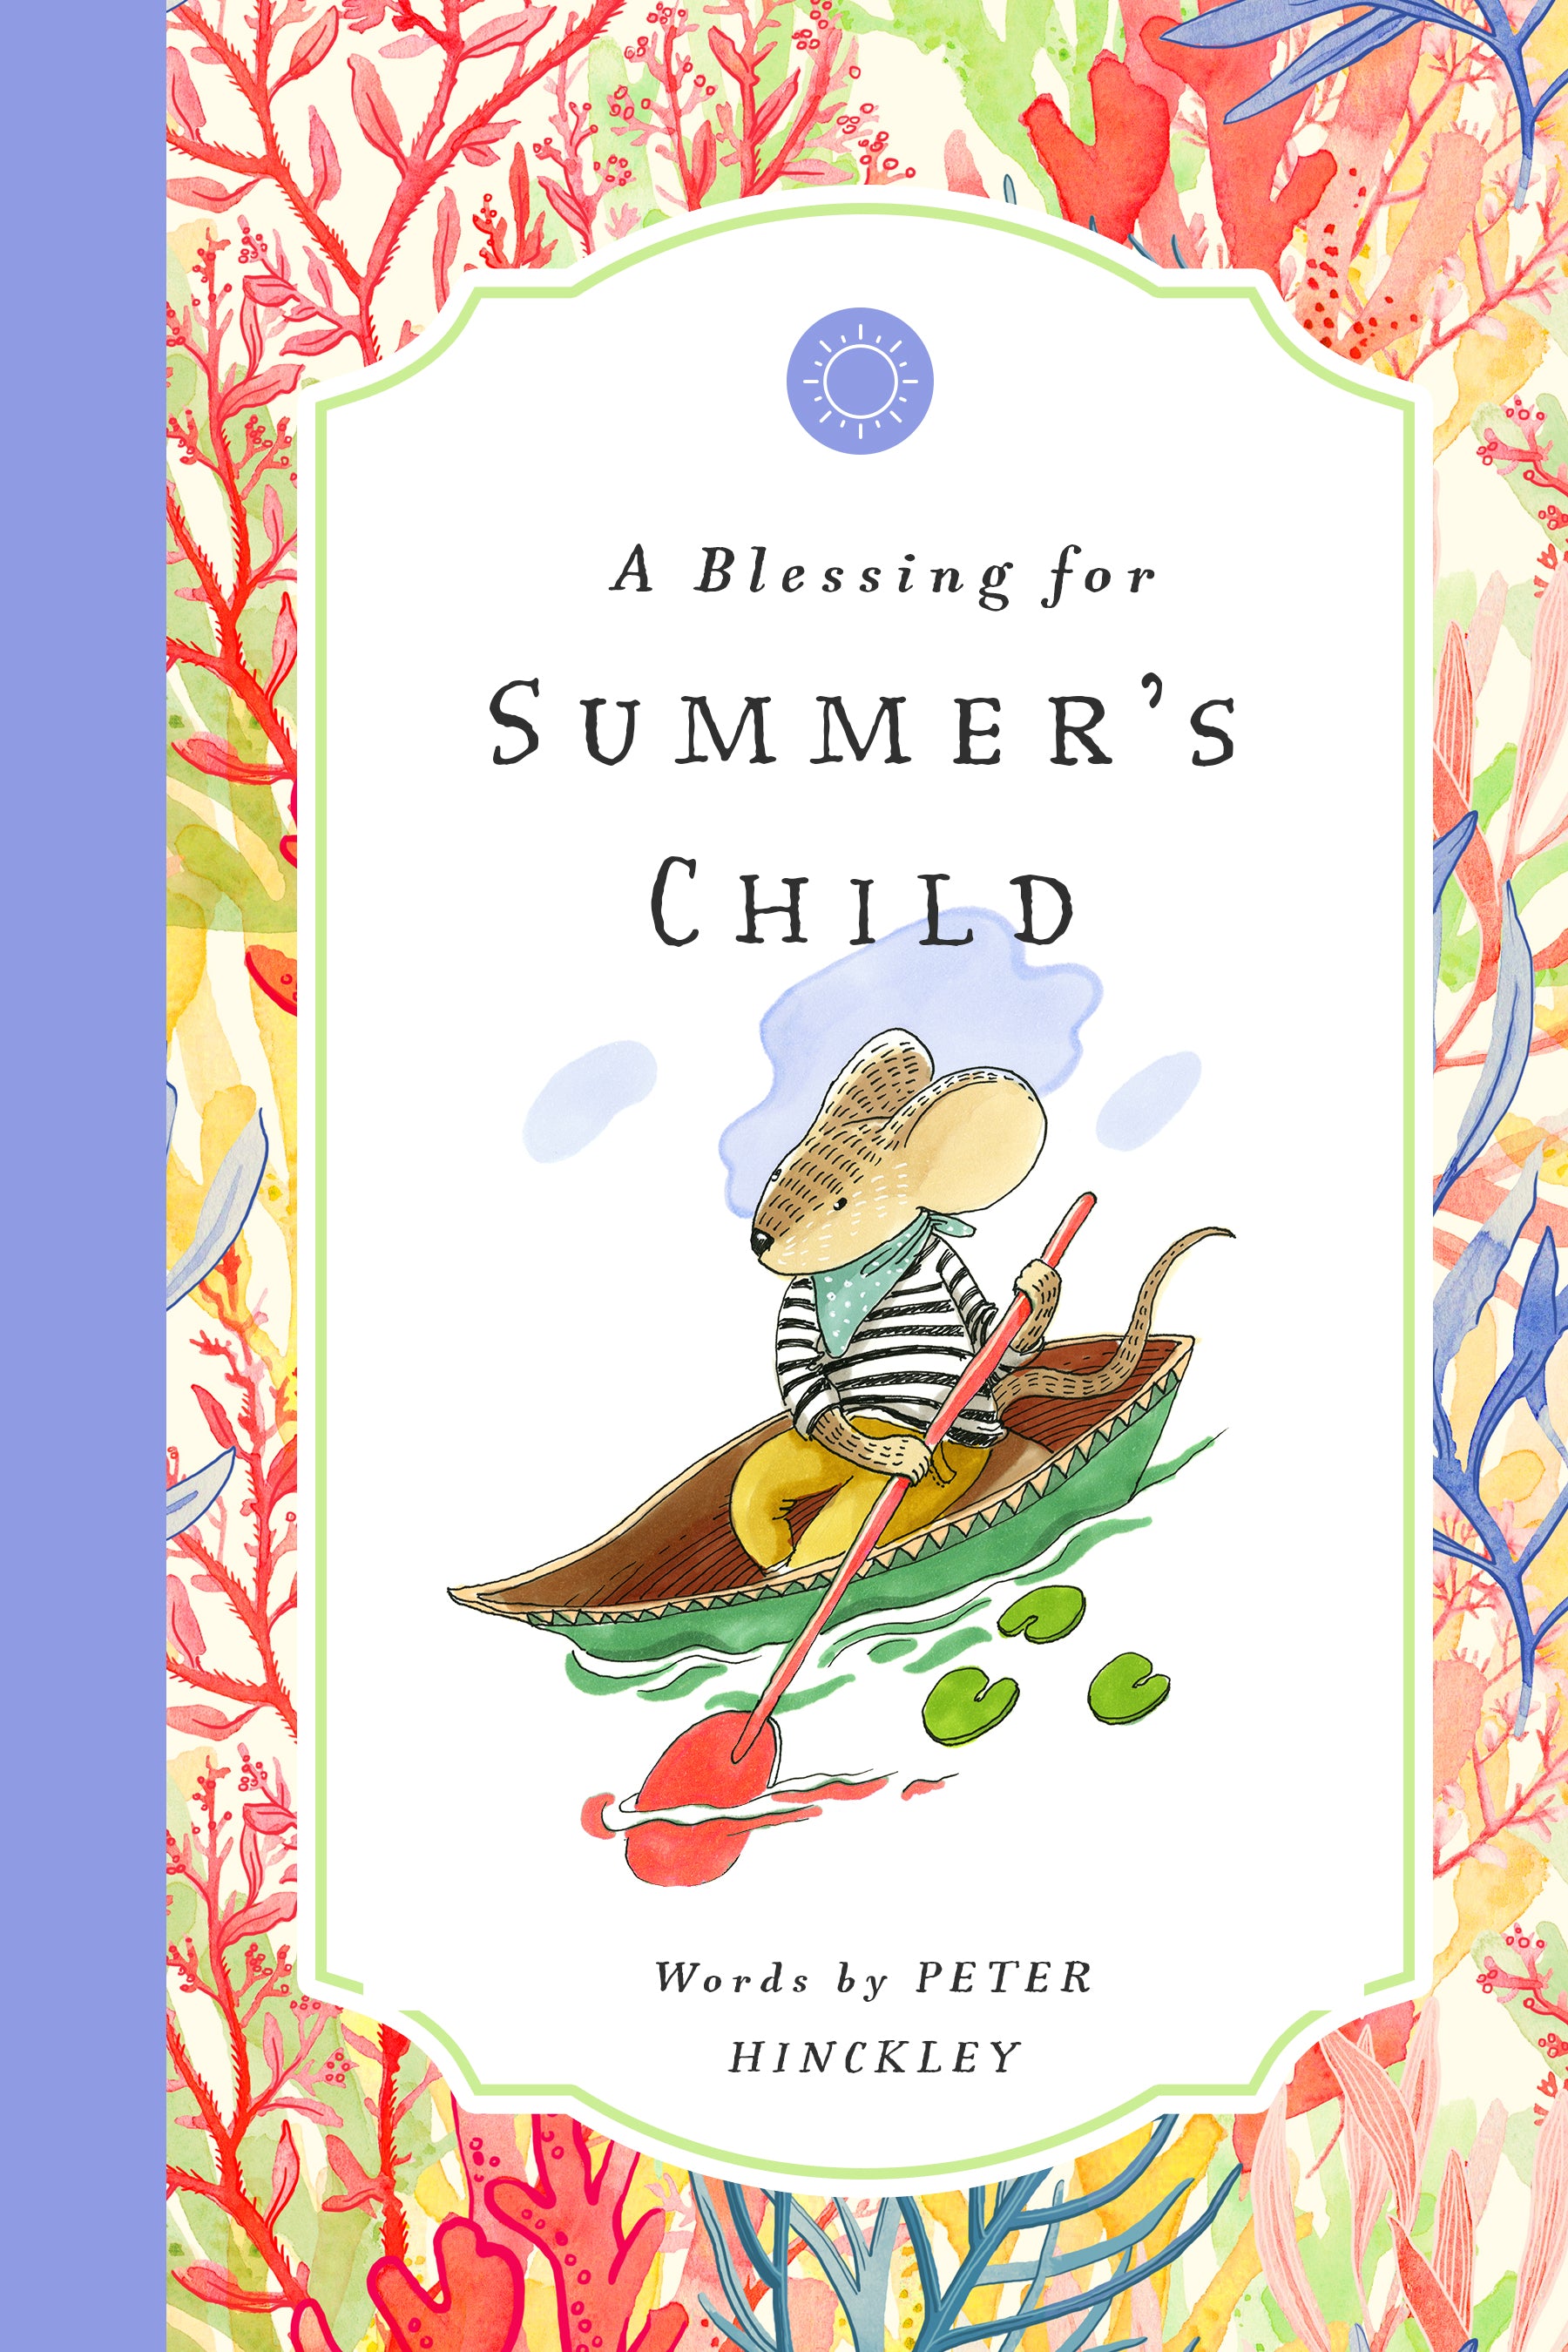 A Blessing for Summer’s Child